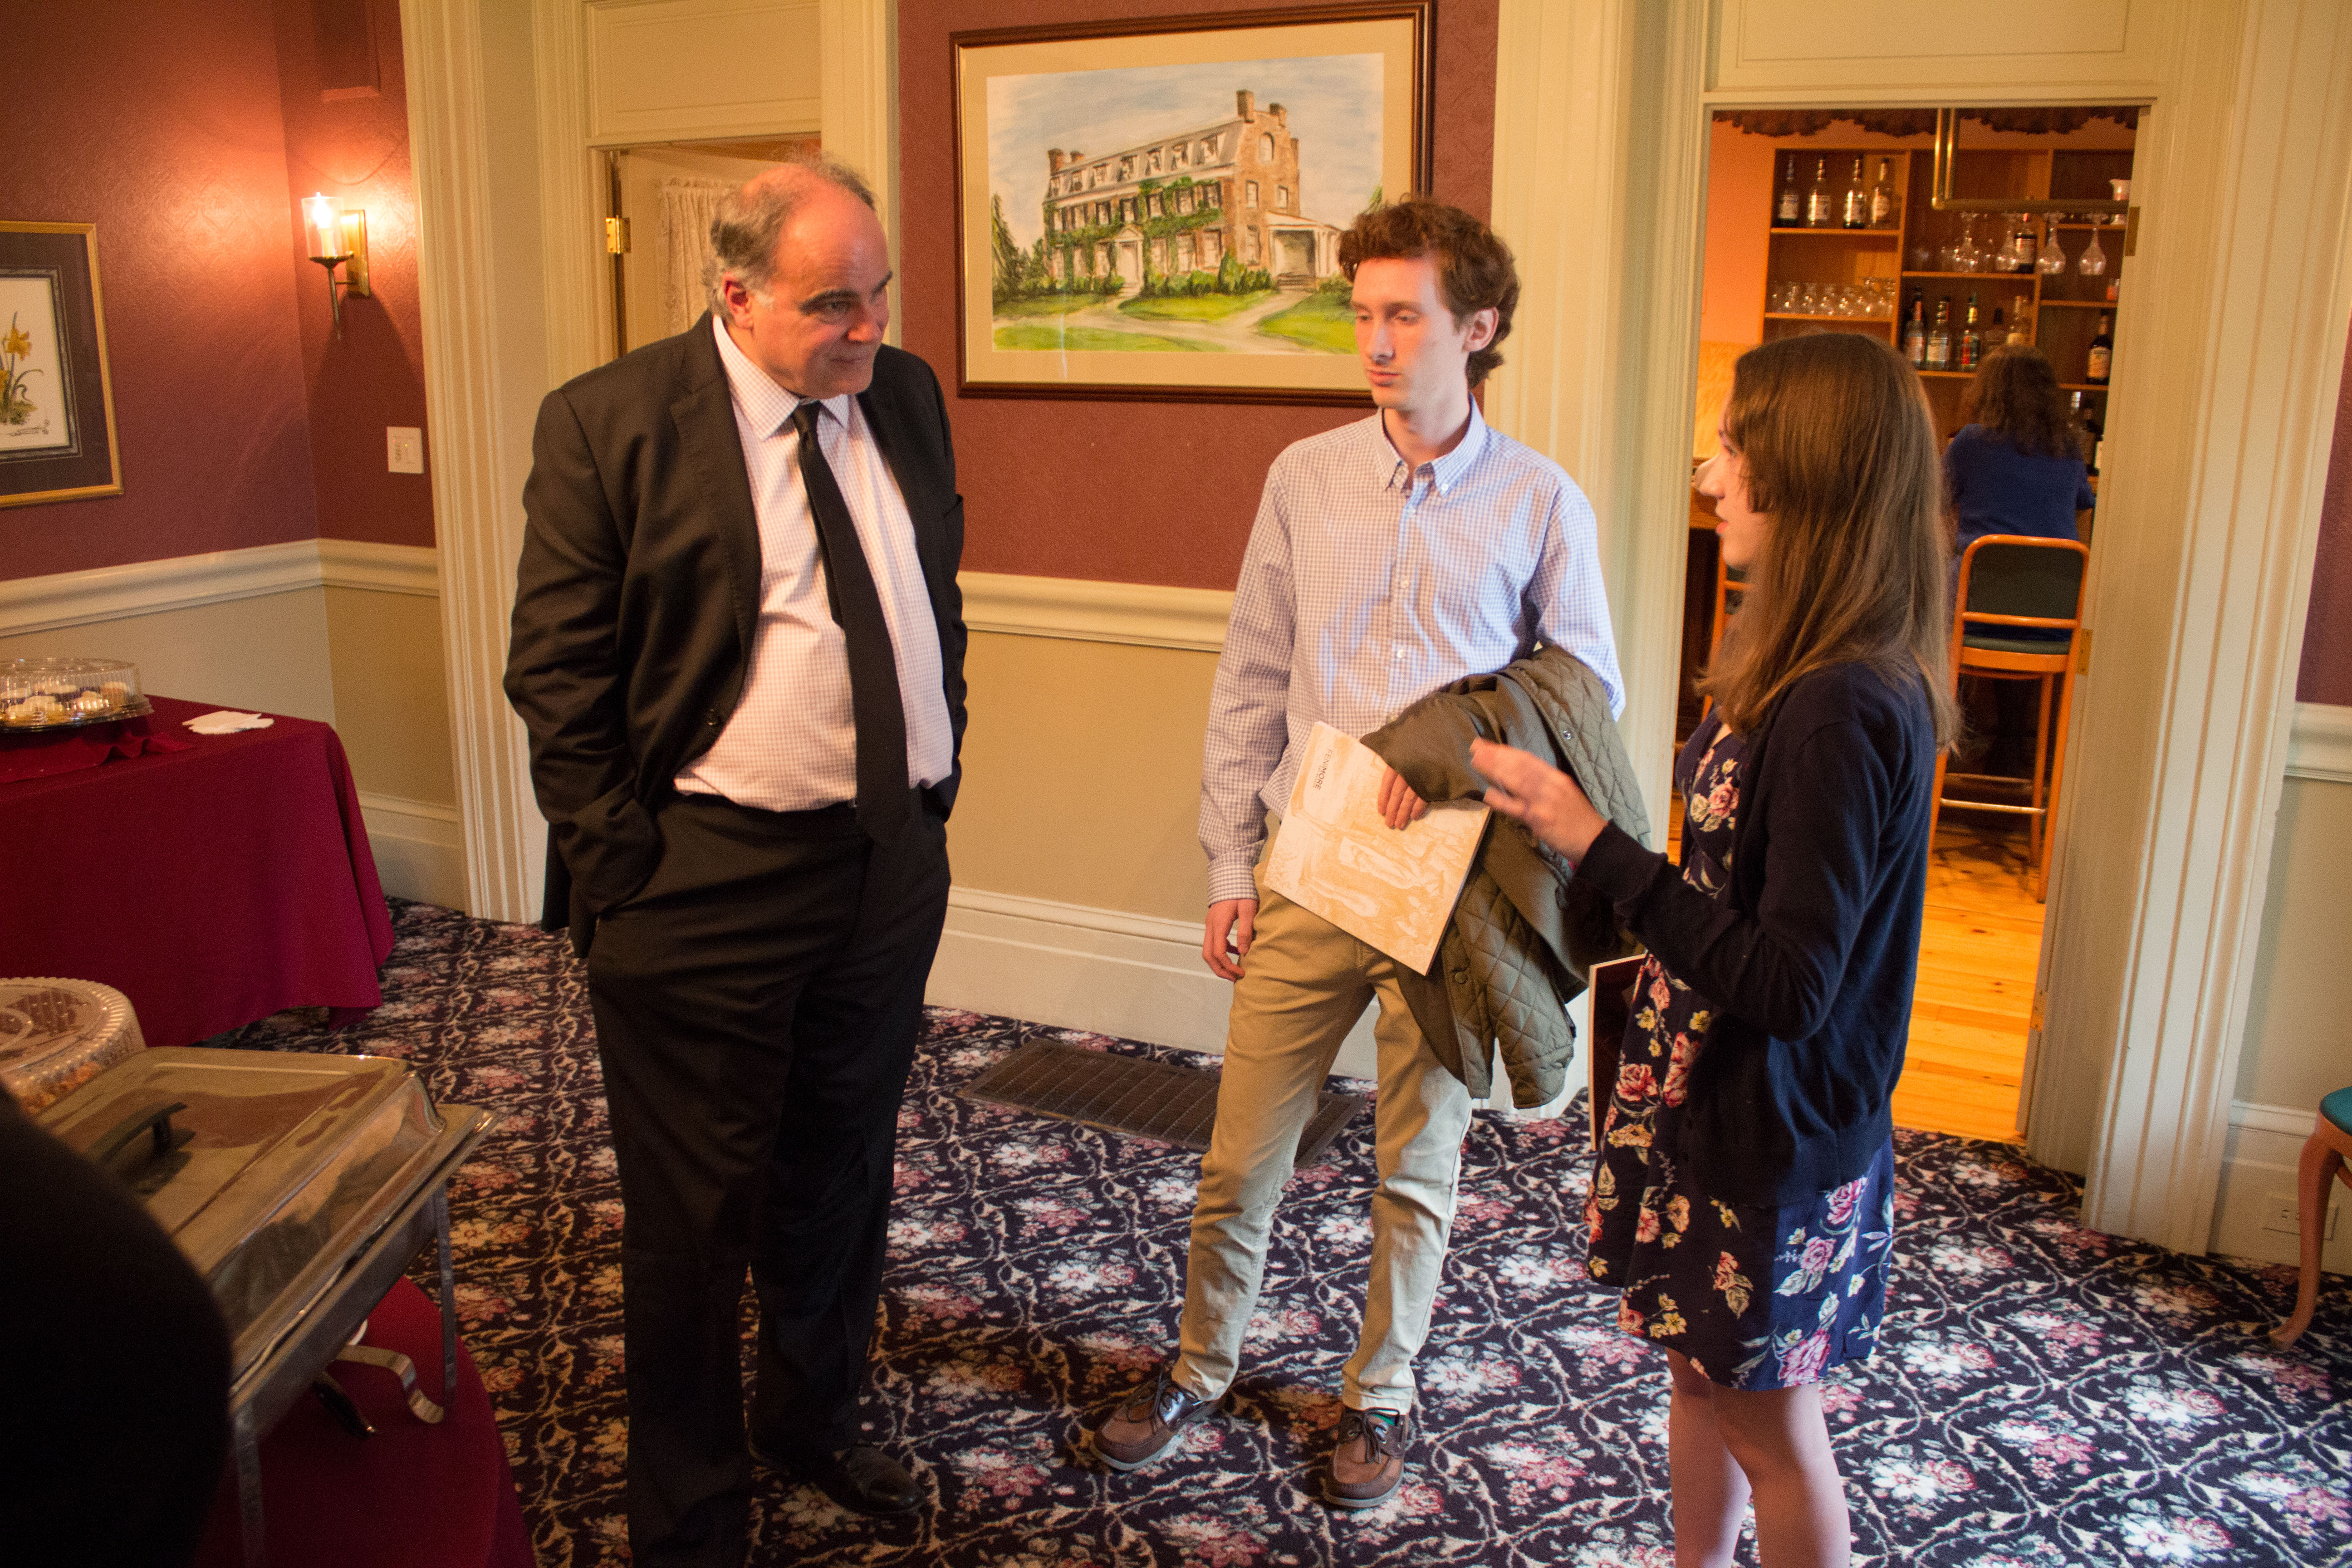 AHI President Robert Paquette with Cas Zablotski and Canisius student Charlotte Kacprowicz